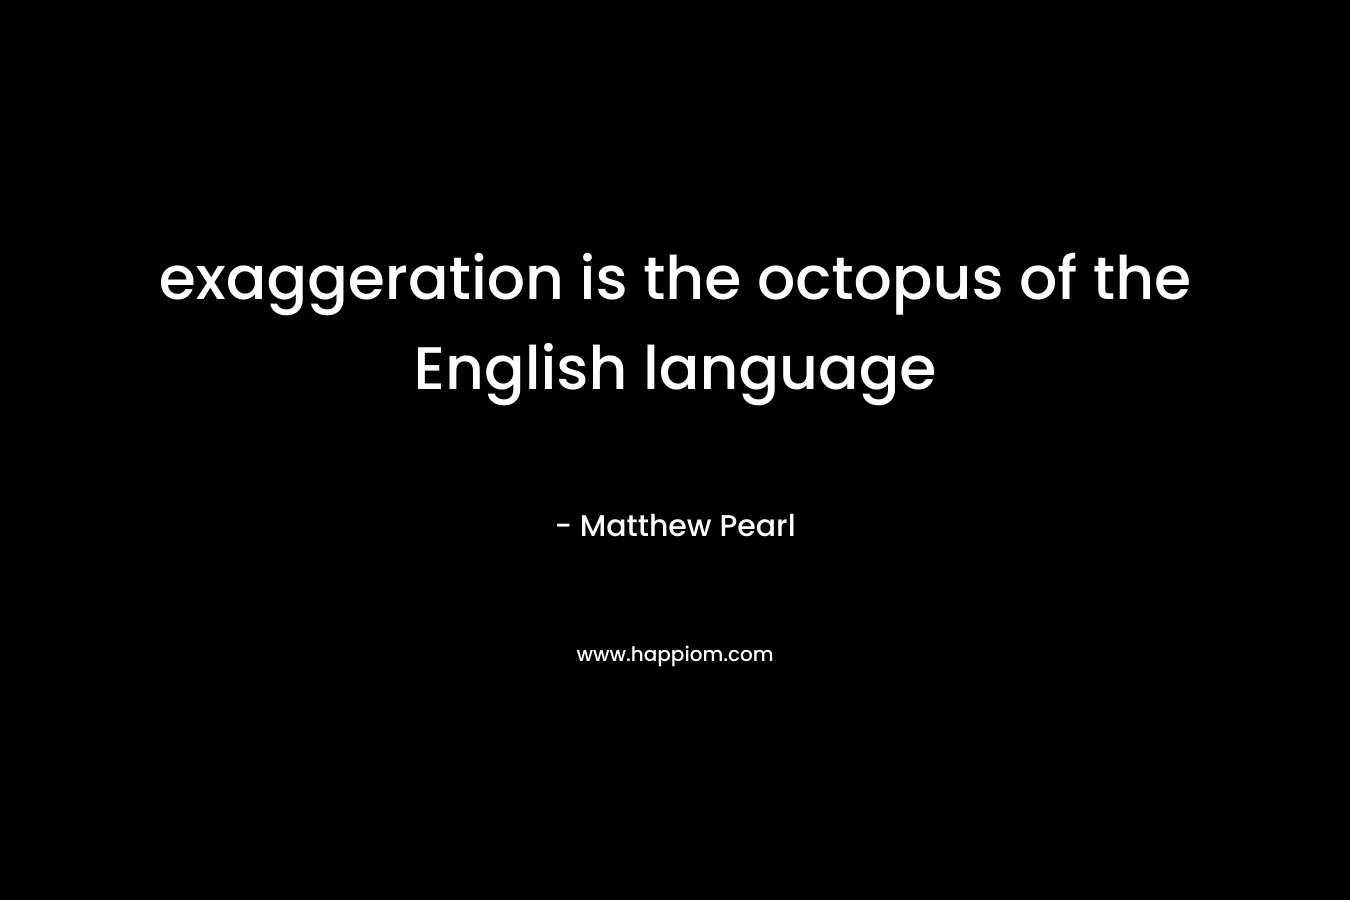 exaggeration is the octopus of the English language